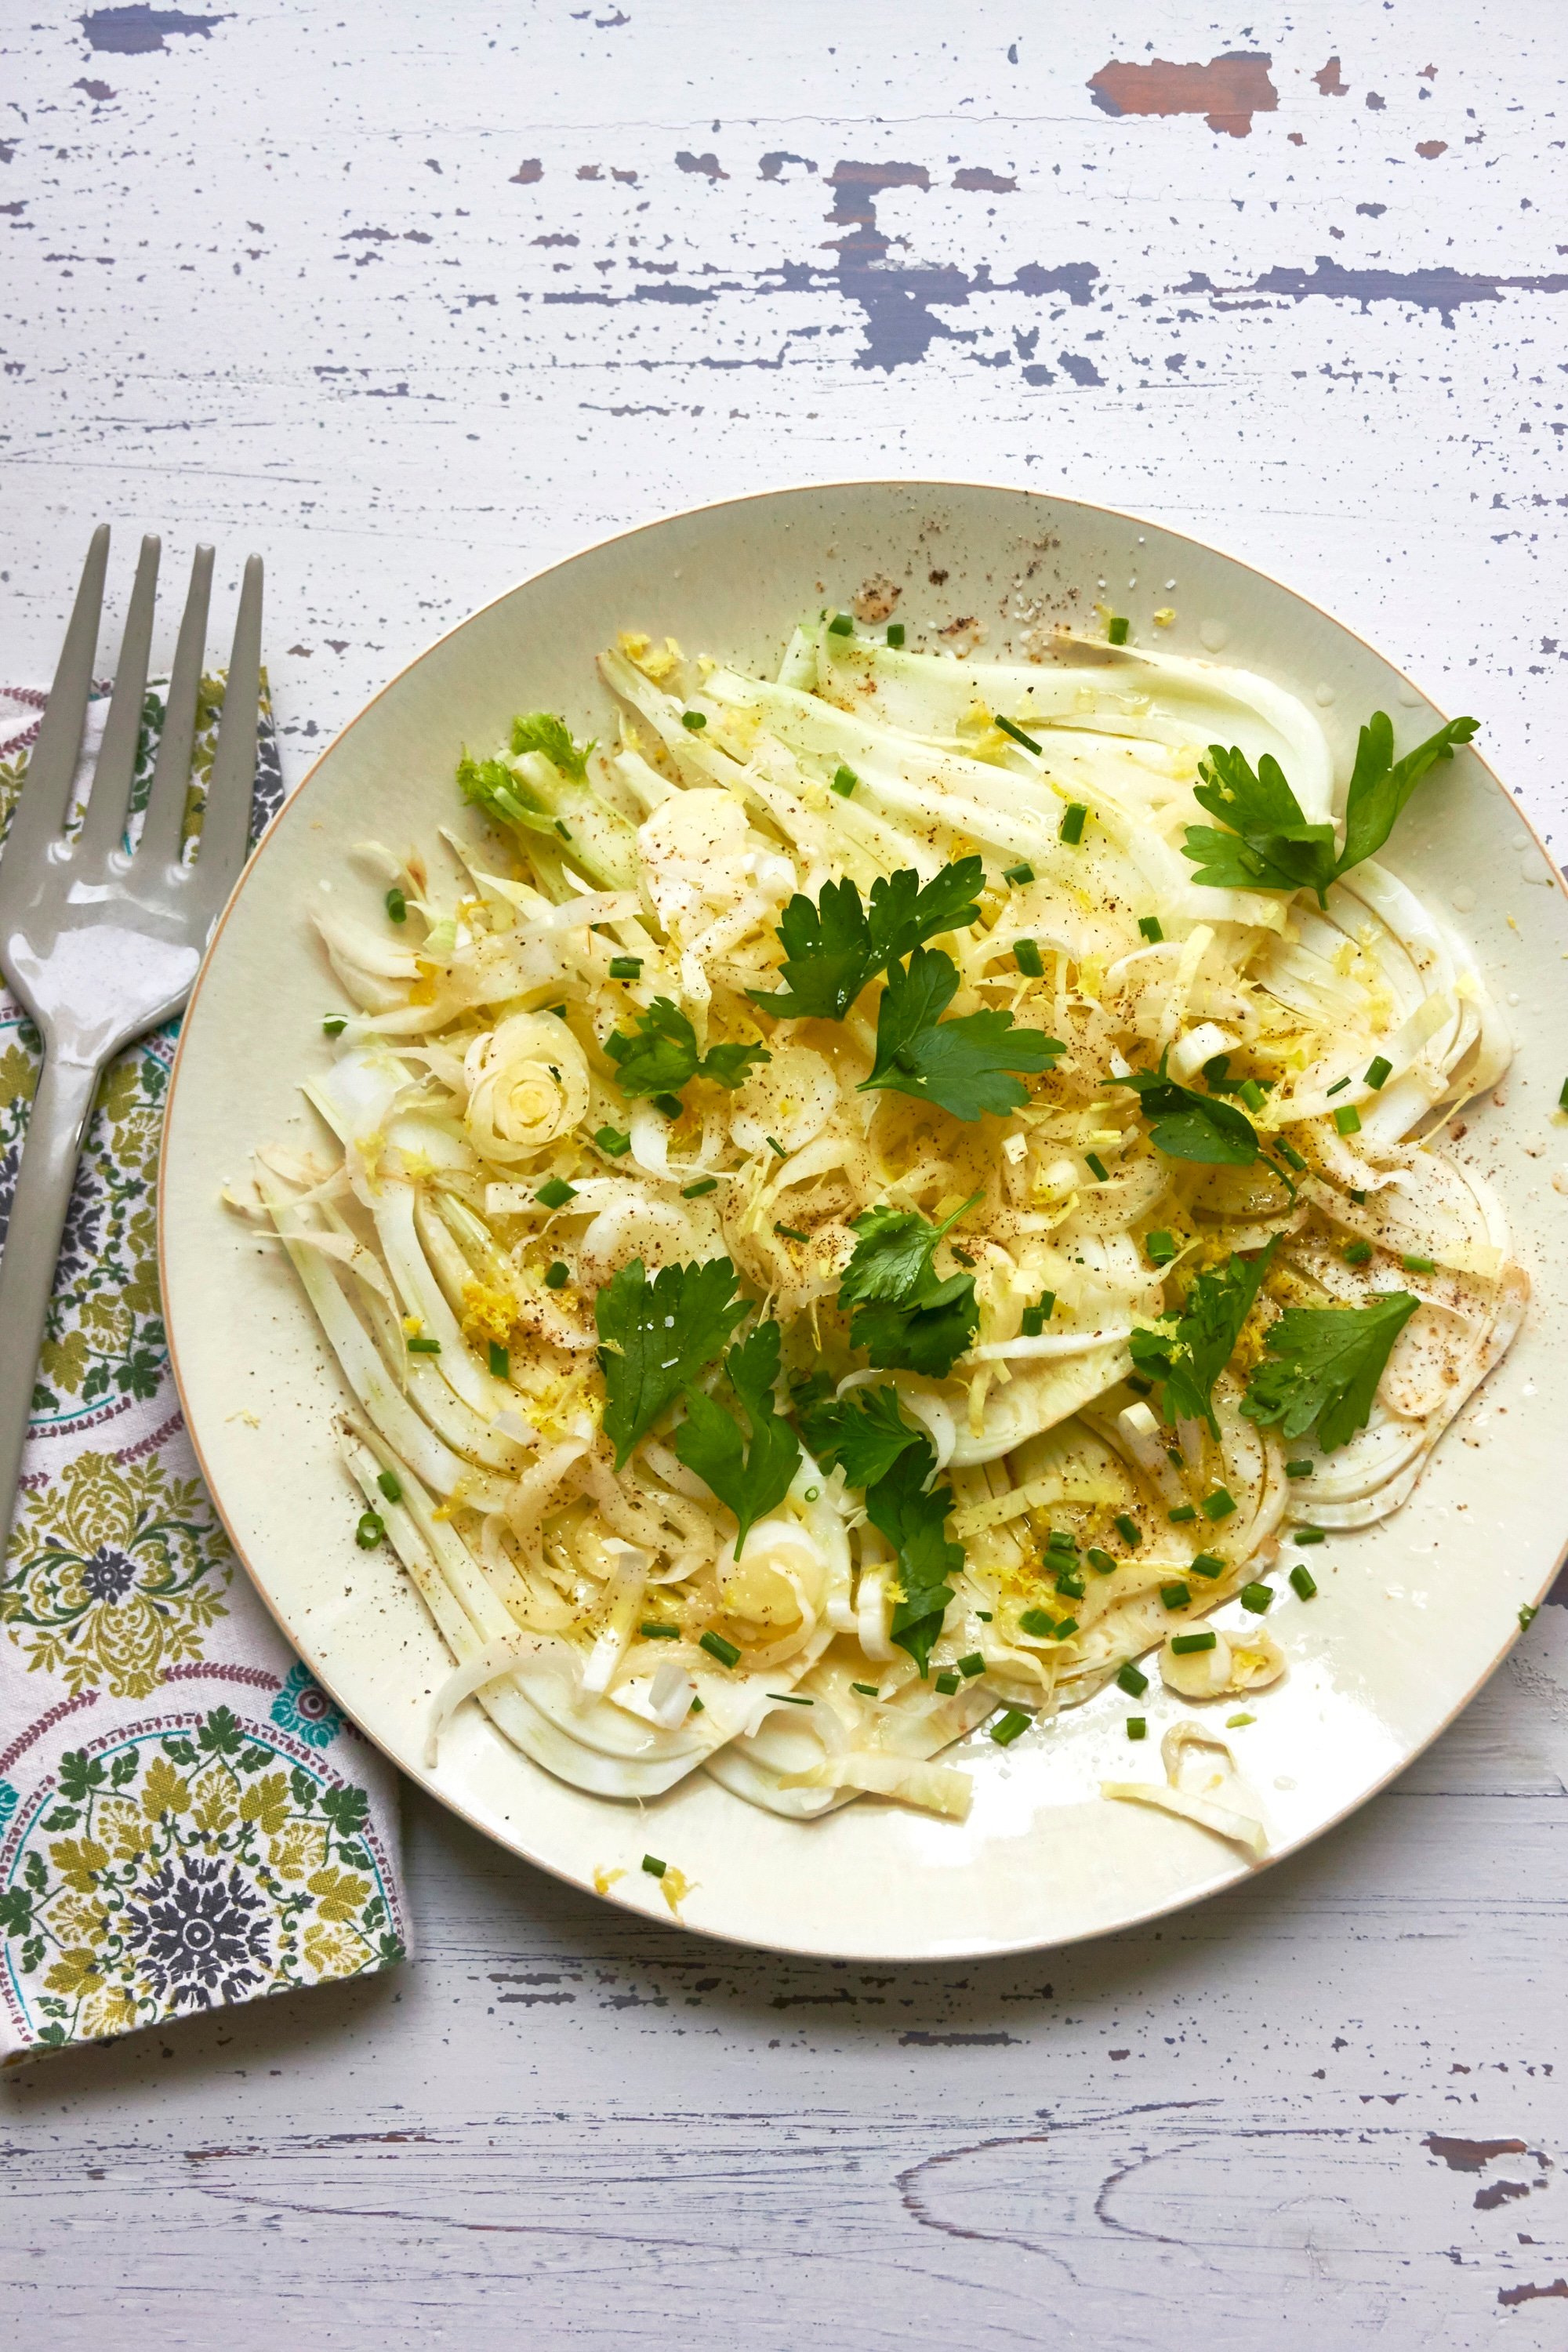 Fennel and Endive Salad on white plate with fork and napkin.